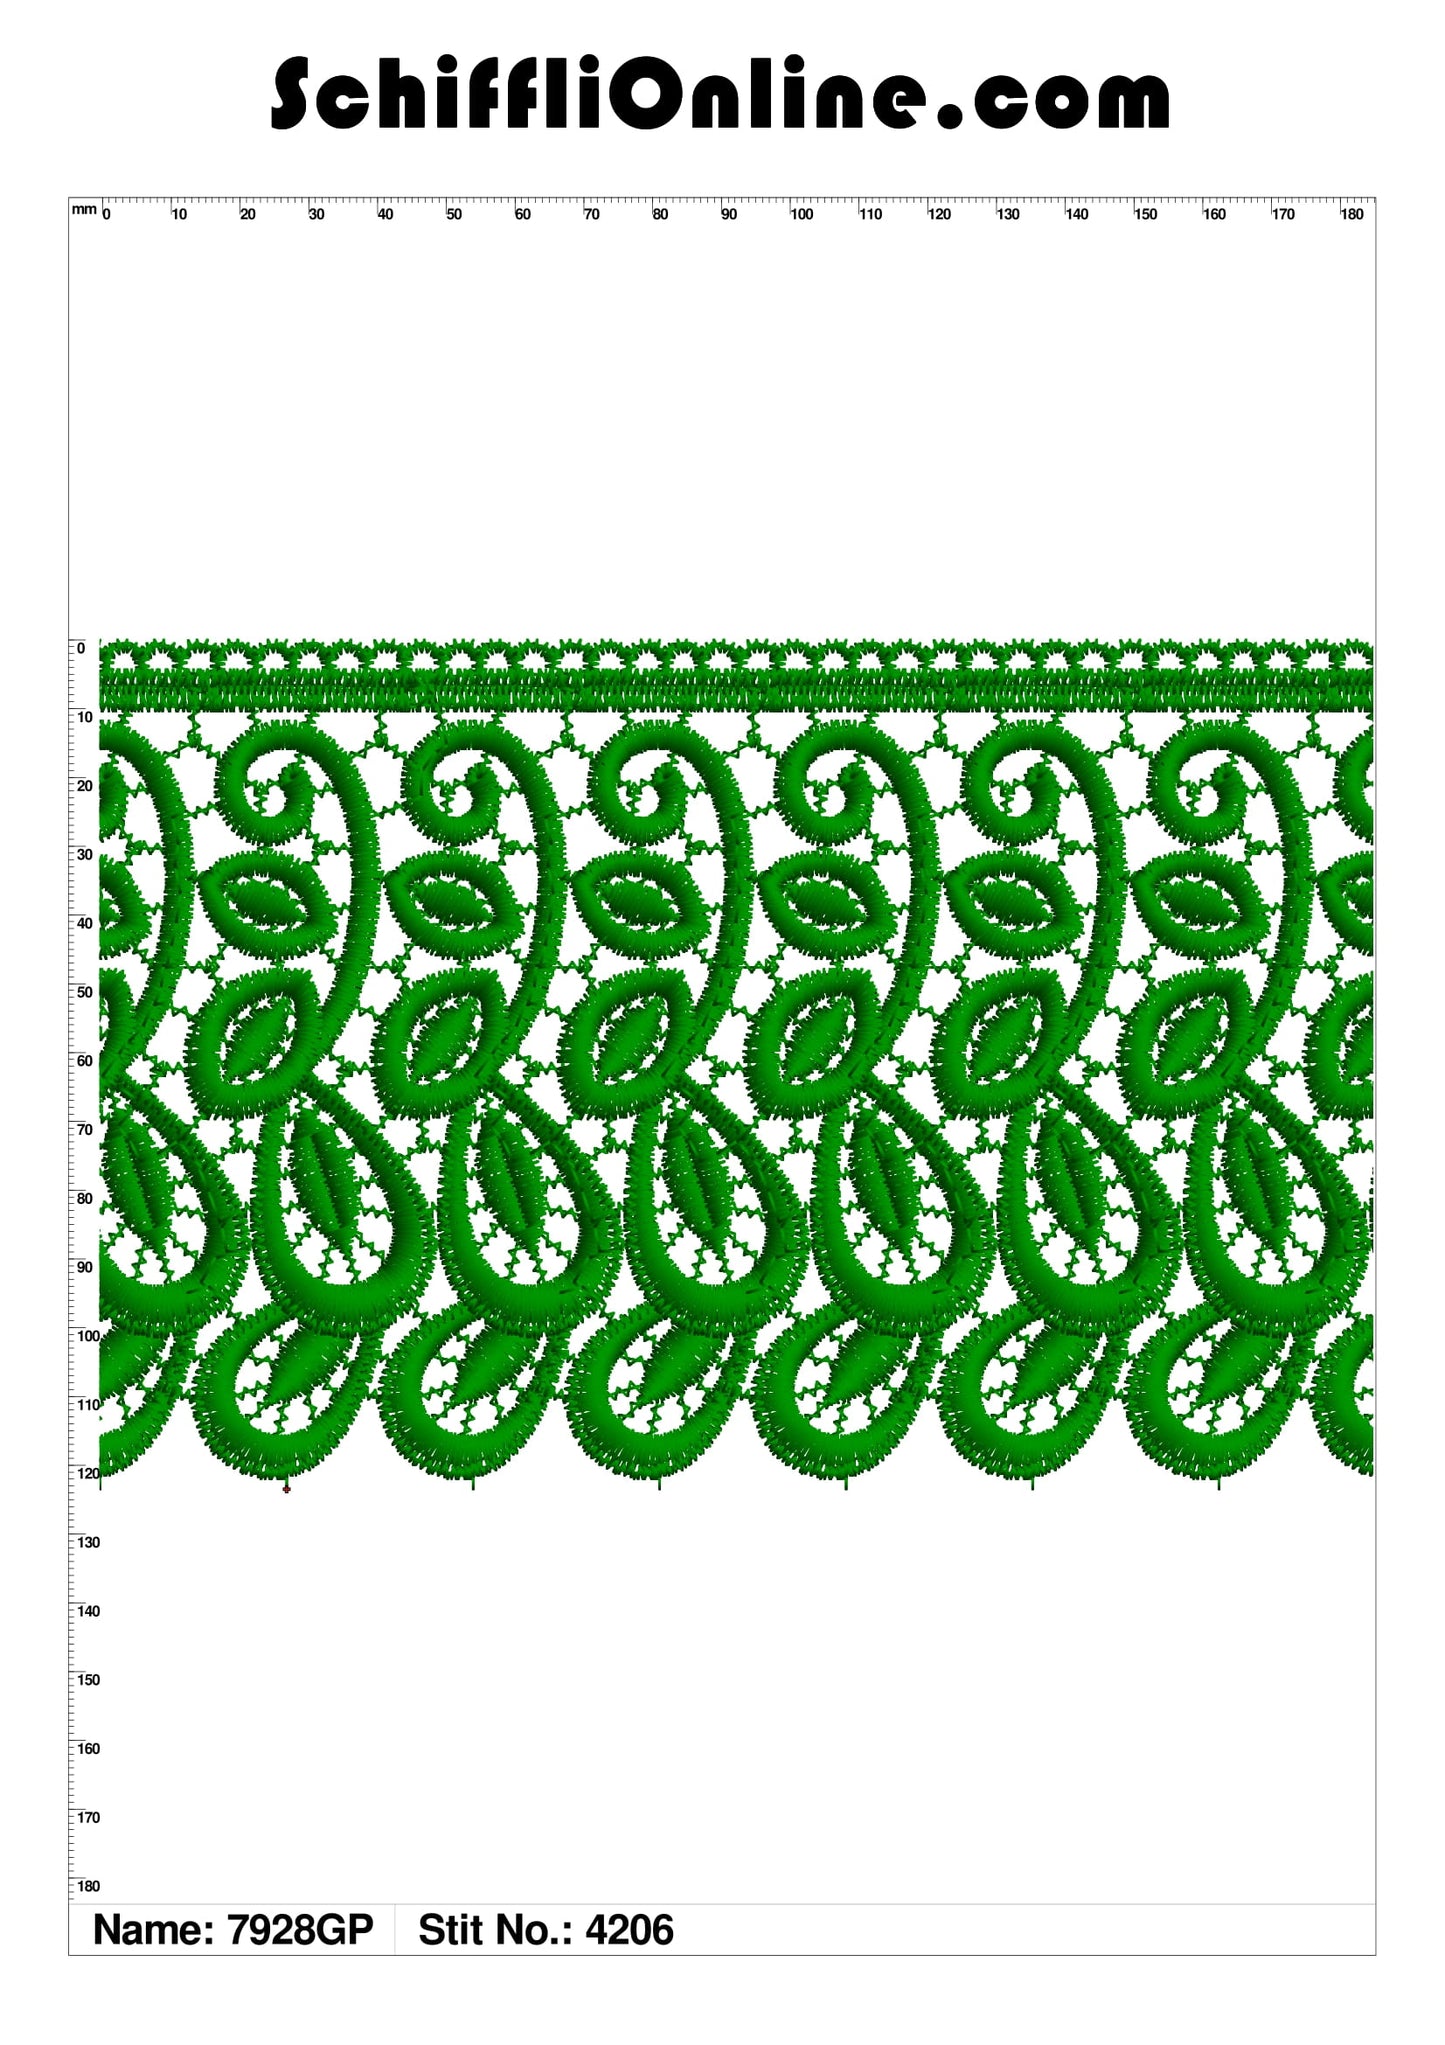 Book 159 CHEMICAL LACE 4X4 50 DESIGNS